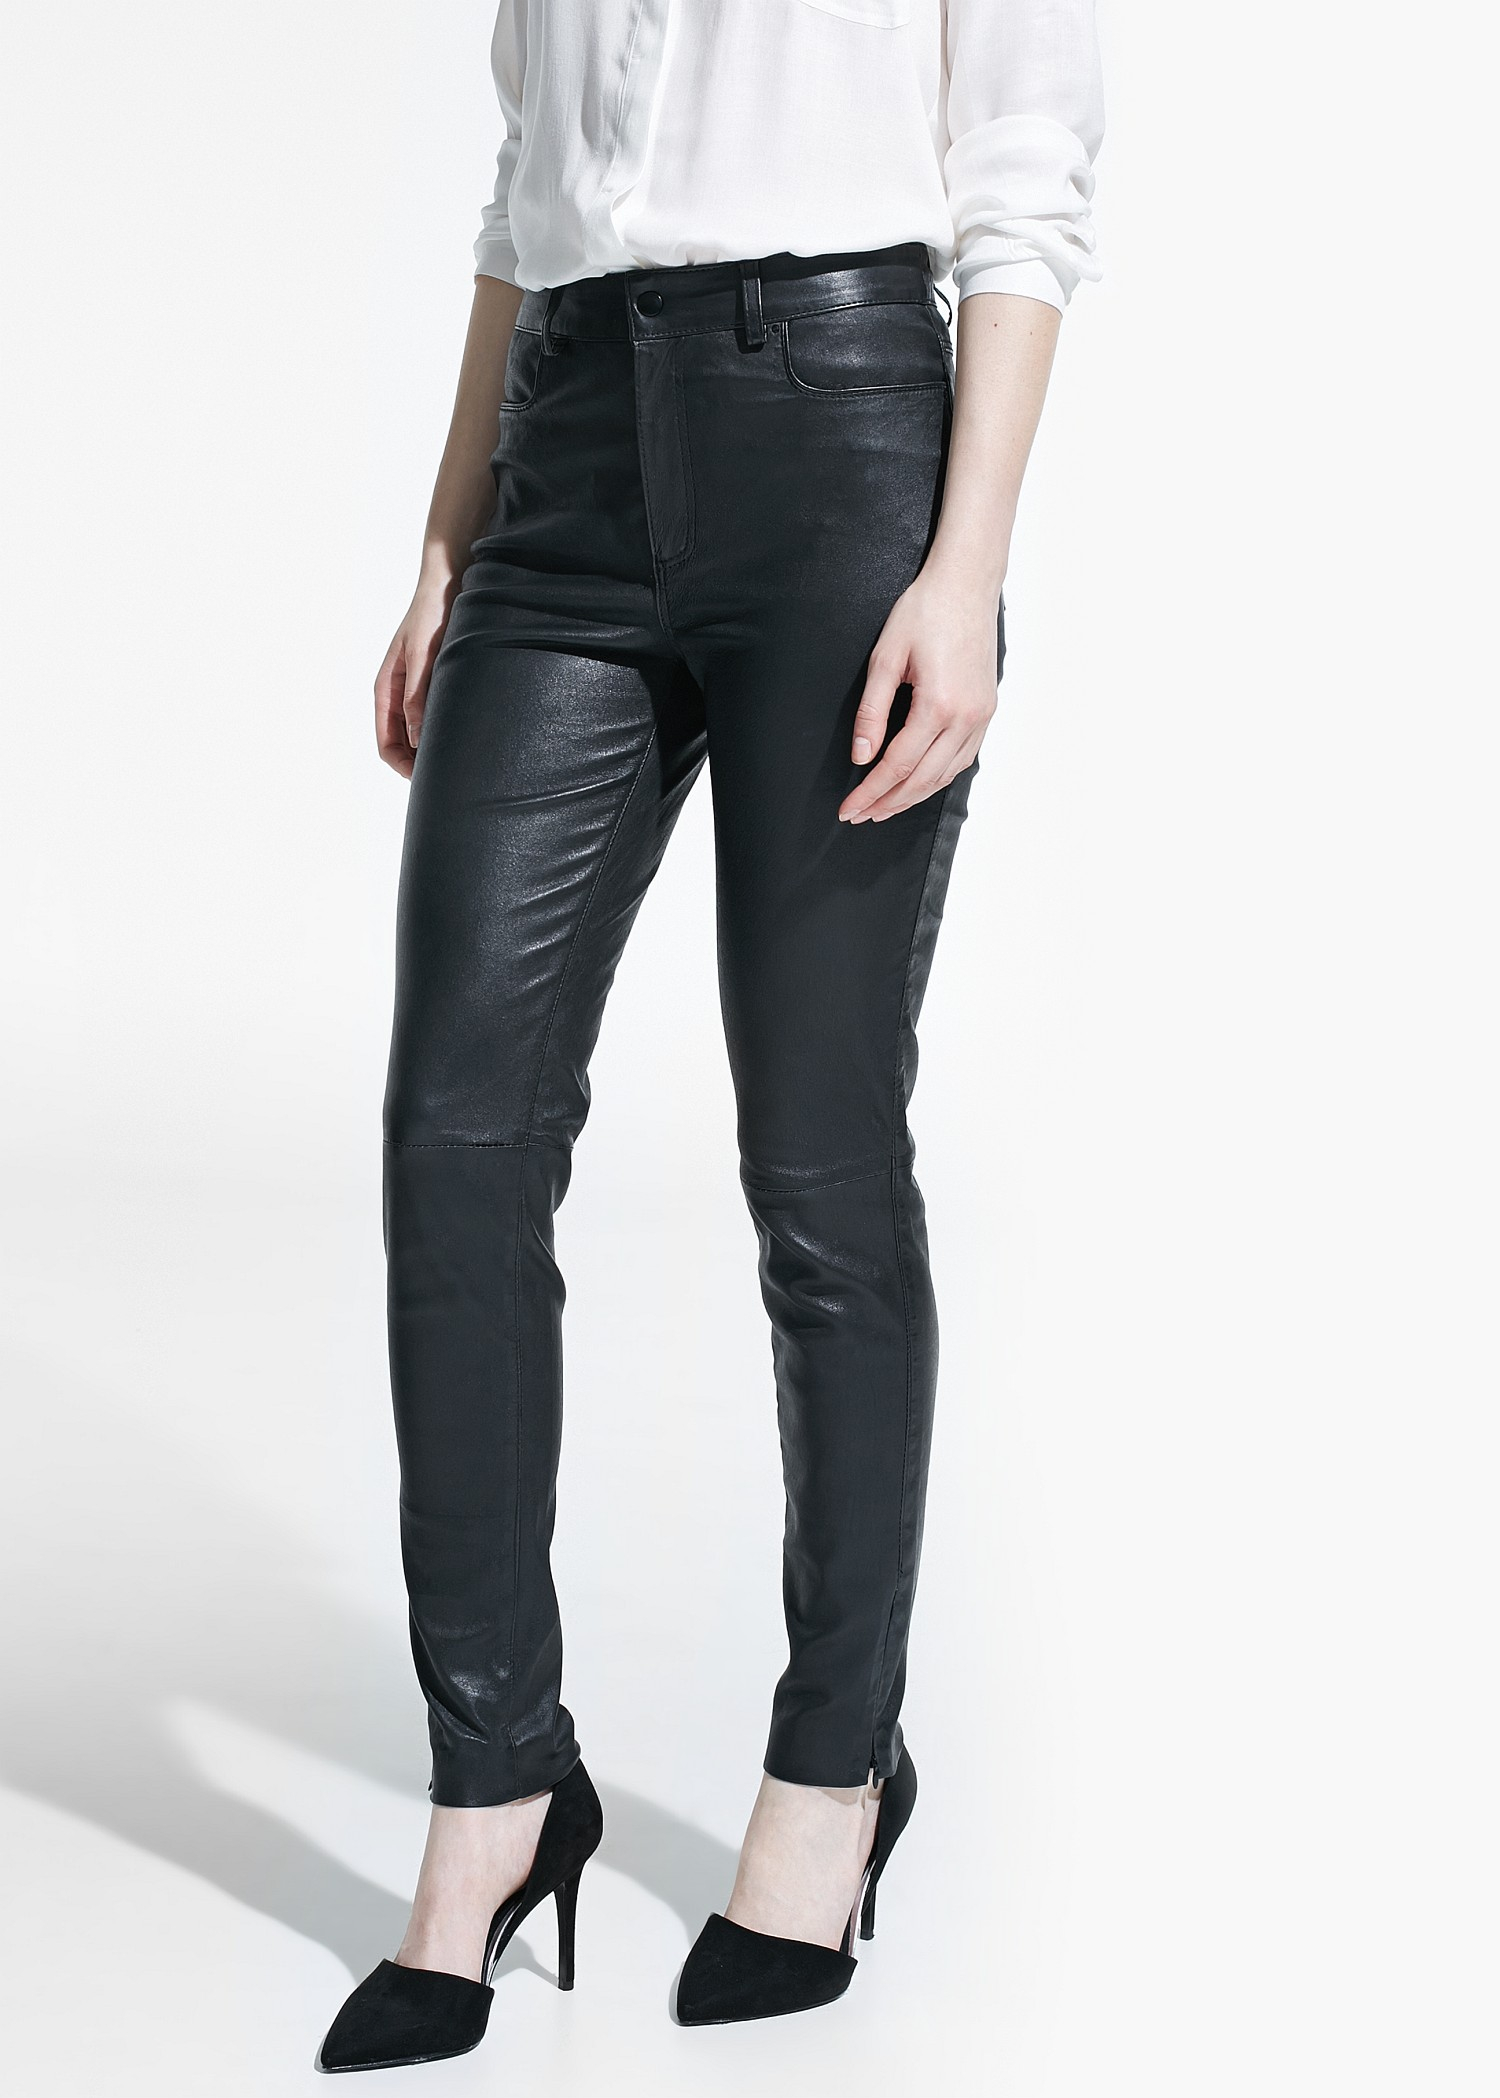 Lyst - Mango High-Waist Leather Trousers in Black